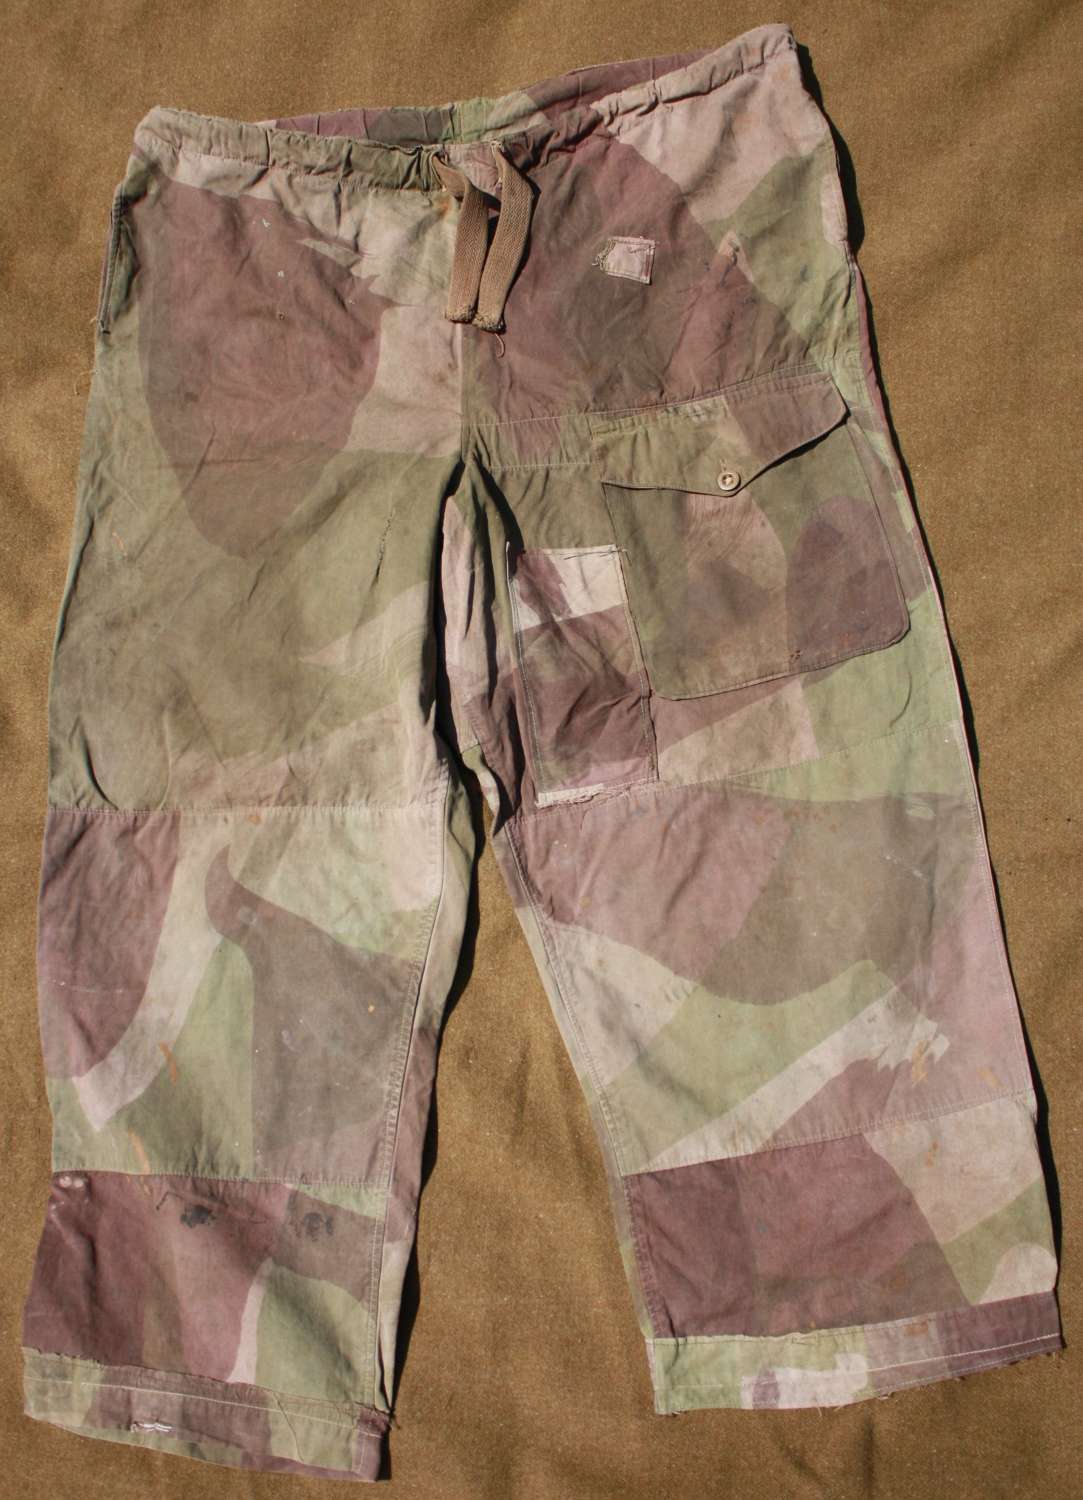 A WELL USED PAIR OF LARGE SIZE CAMOFLAGE WINDPROOF TROUSERS